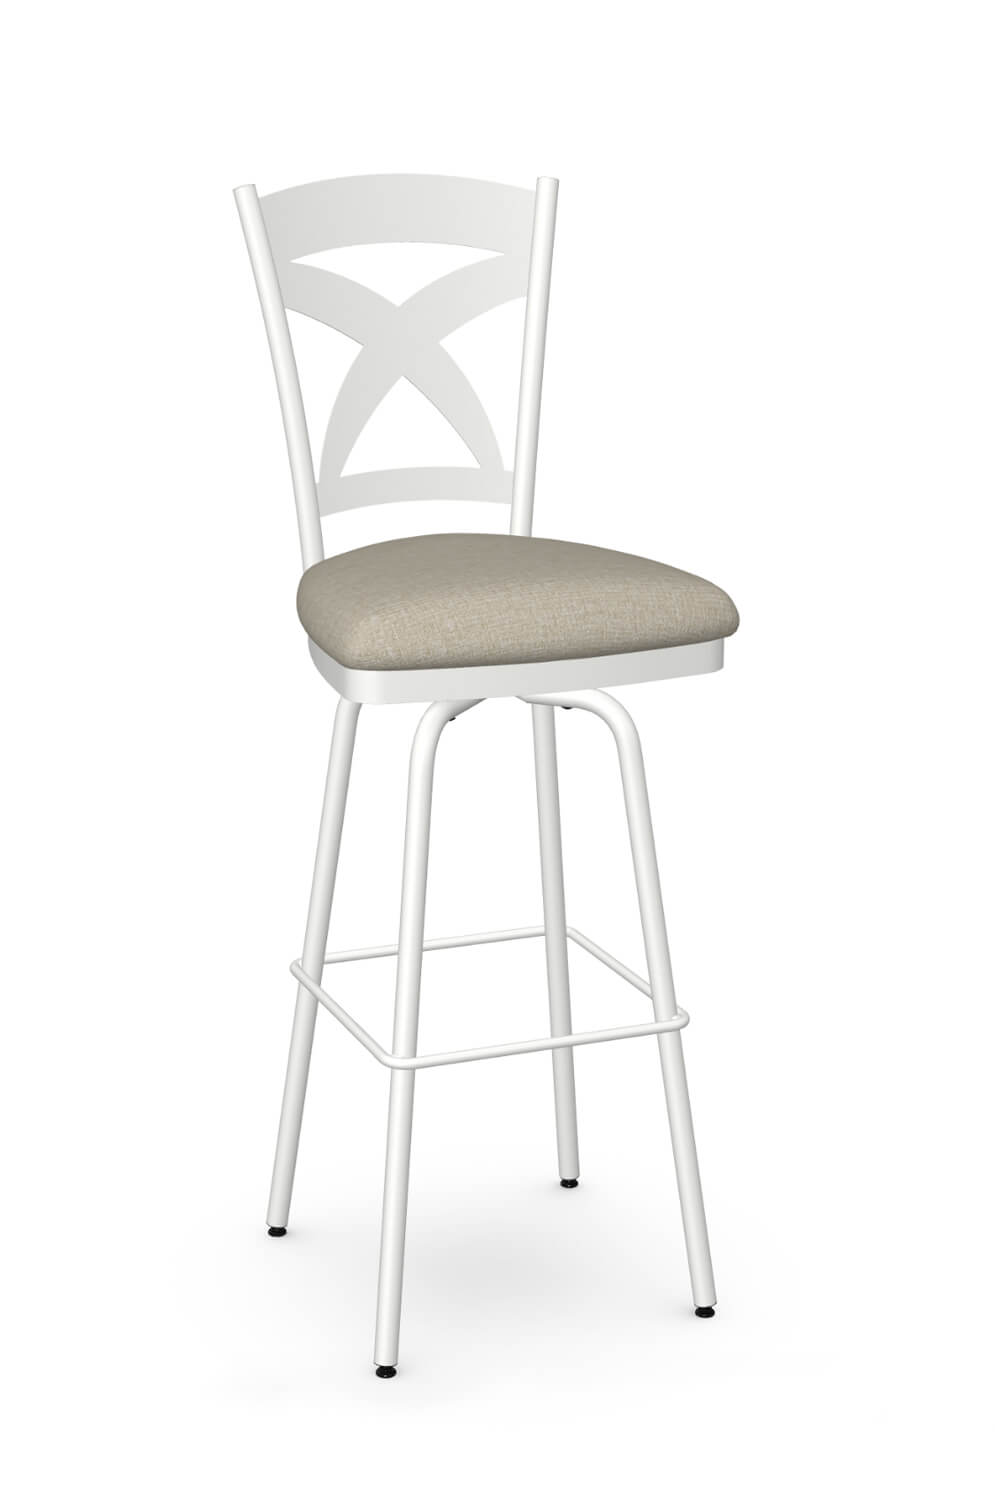 Amisco's Marcus White Traditional Swivel Bar Stool with Tan Seat Cushion